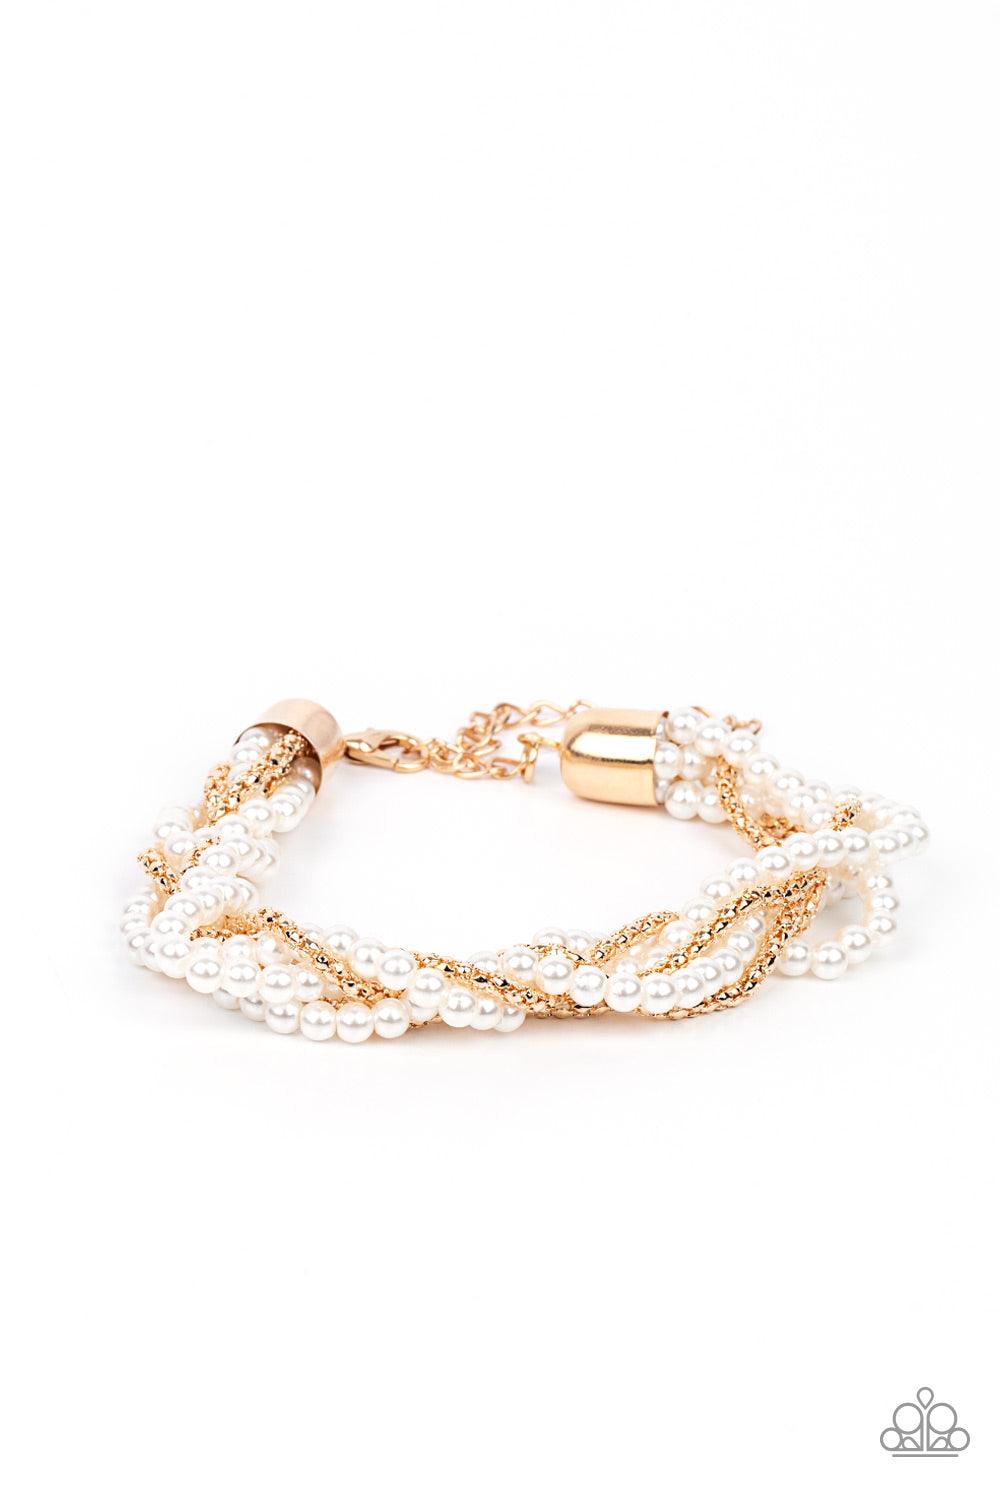 Paparazzi Accessories Vintage Variation - Gold Capped in gold fittings, strands of bubbly white pearls and dainty gold popcorn chains delicately weave around the wrist, creating an elegantly effervescent display. Features an adjustable clasp closure. Sold